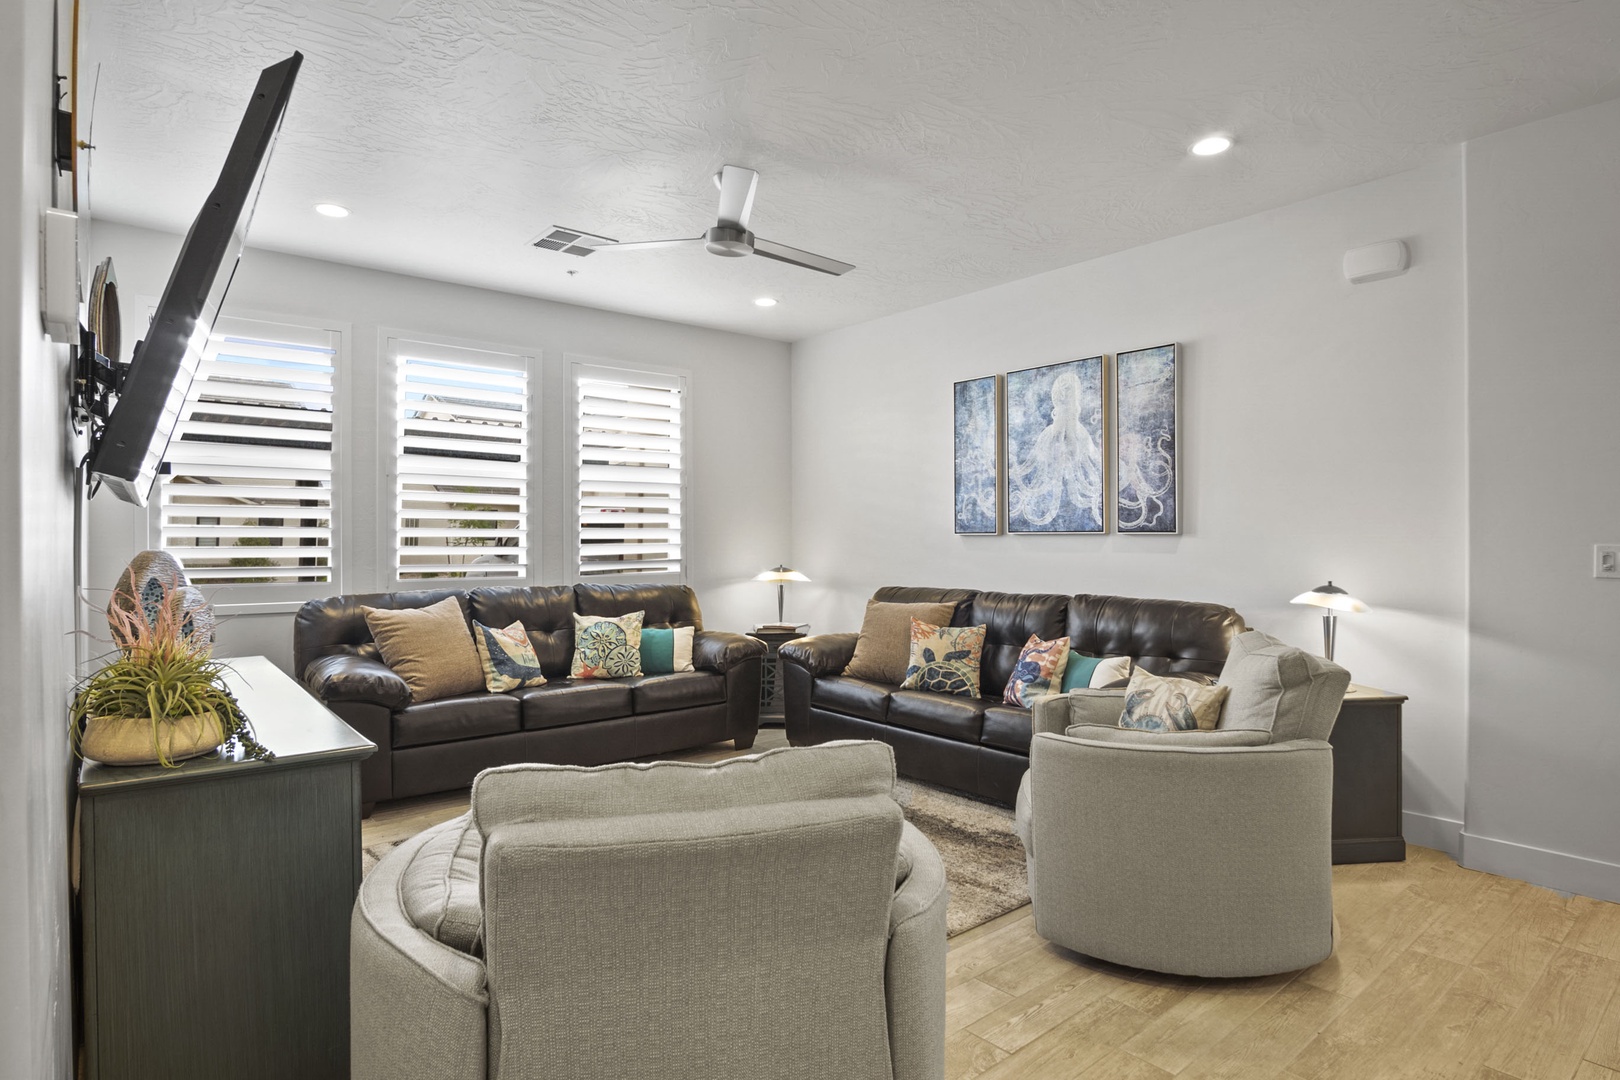 The Living Room offers plenty of comfortable seating and a Full Sleeper Sofa